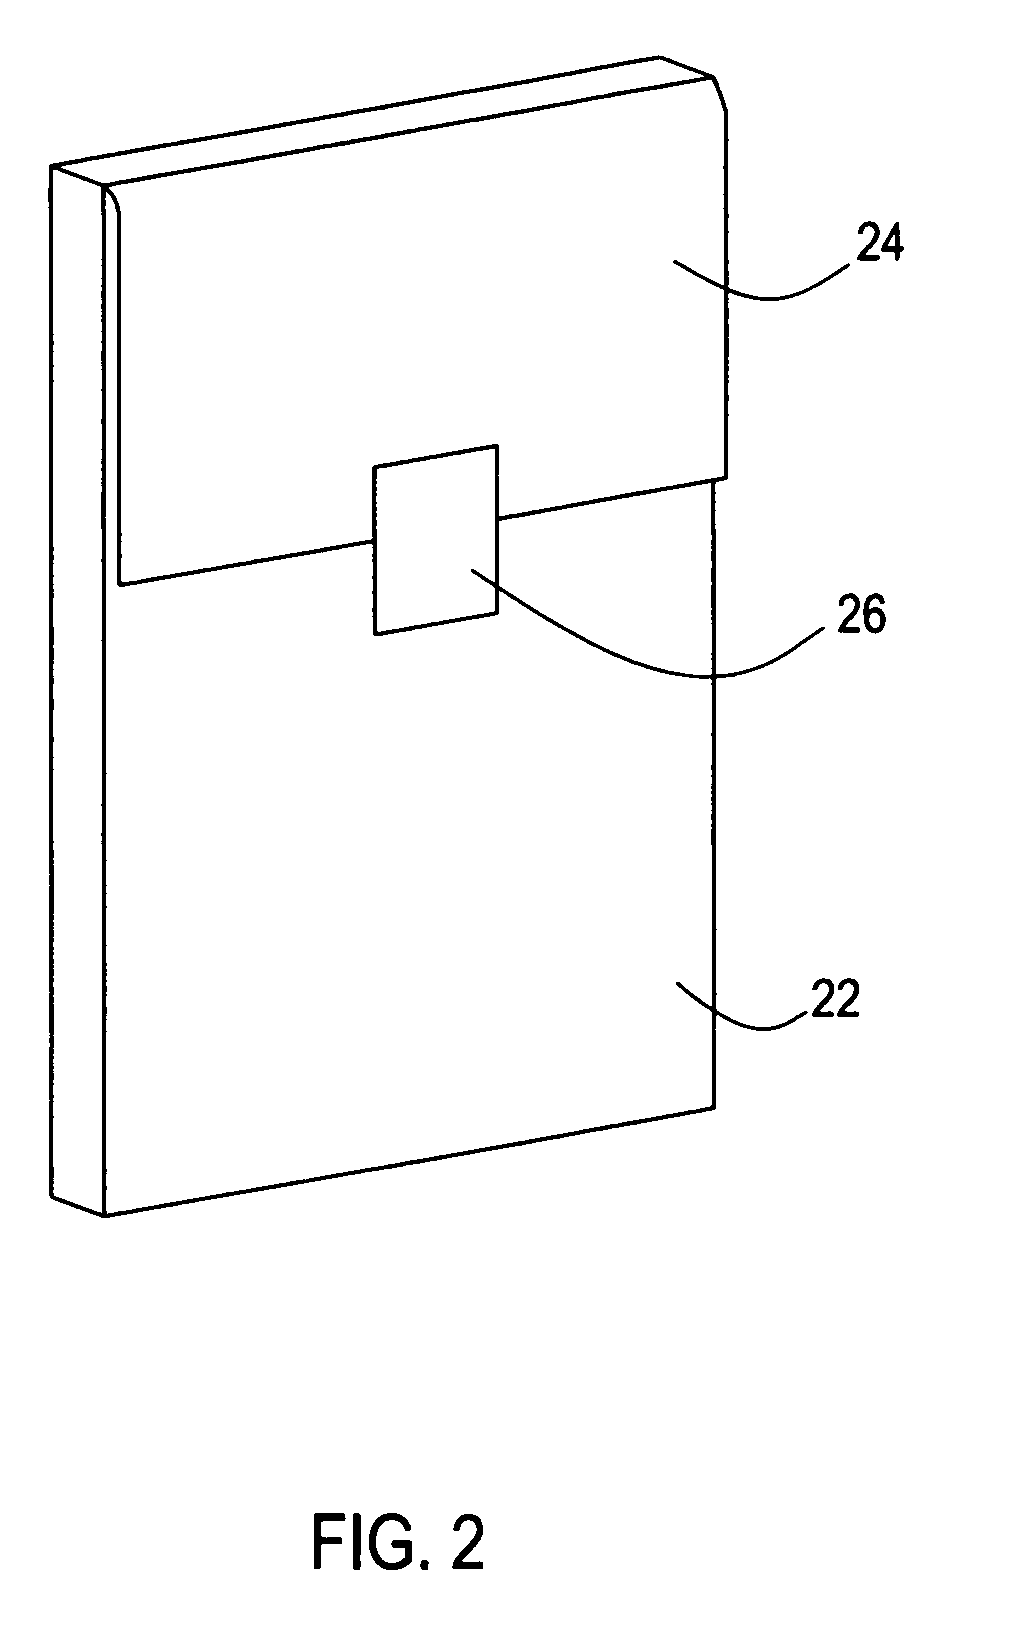 Portable rapidly deployable waste containment device